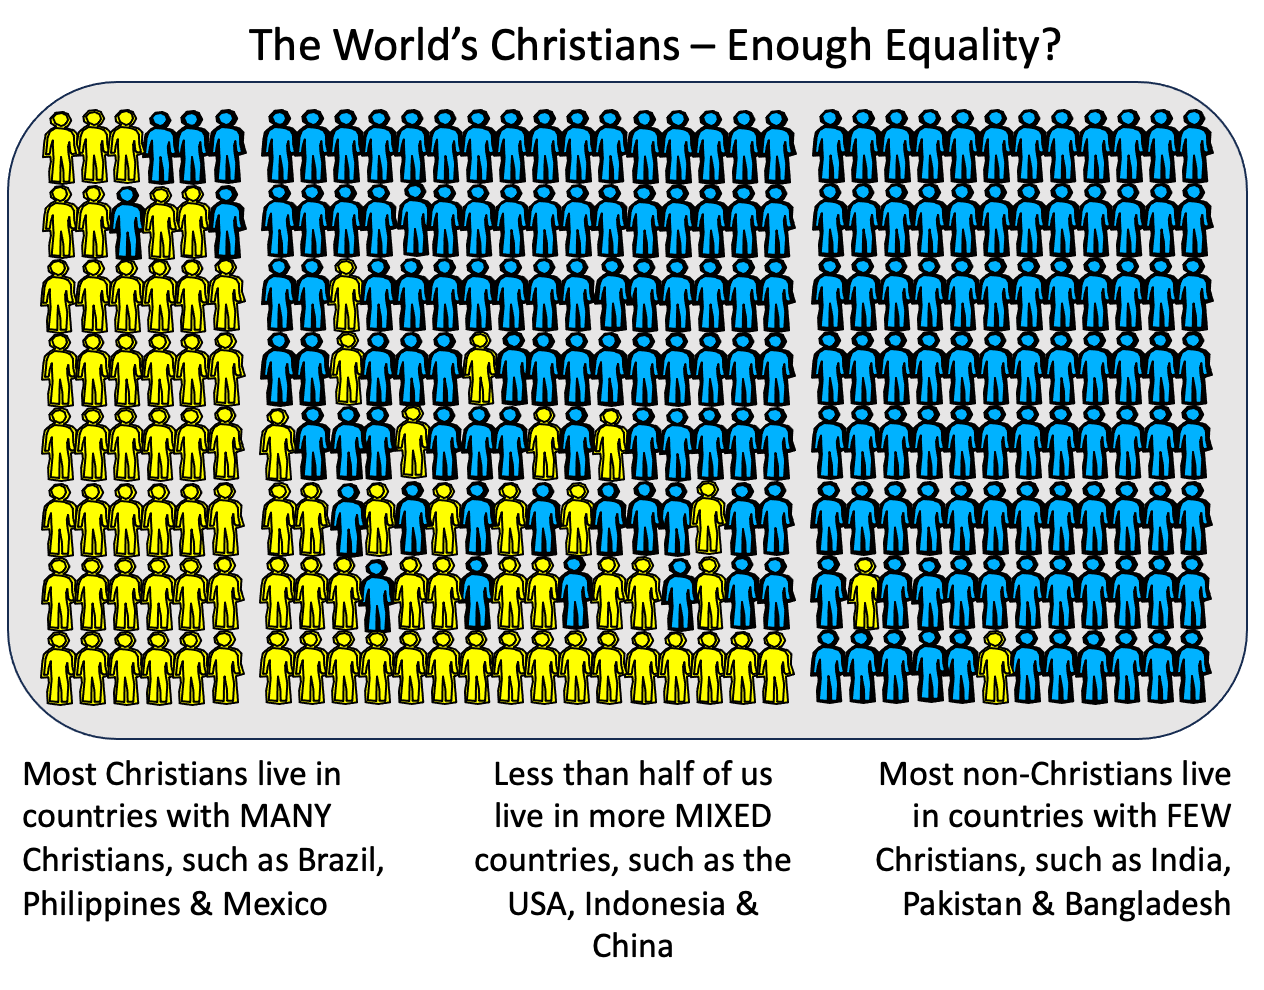 A group of blue and yellow people

Description automatically generated